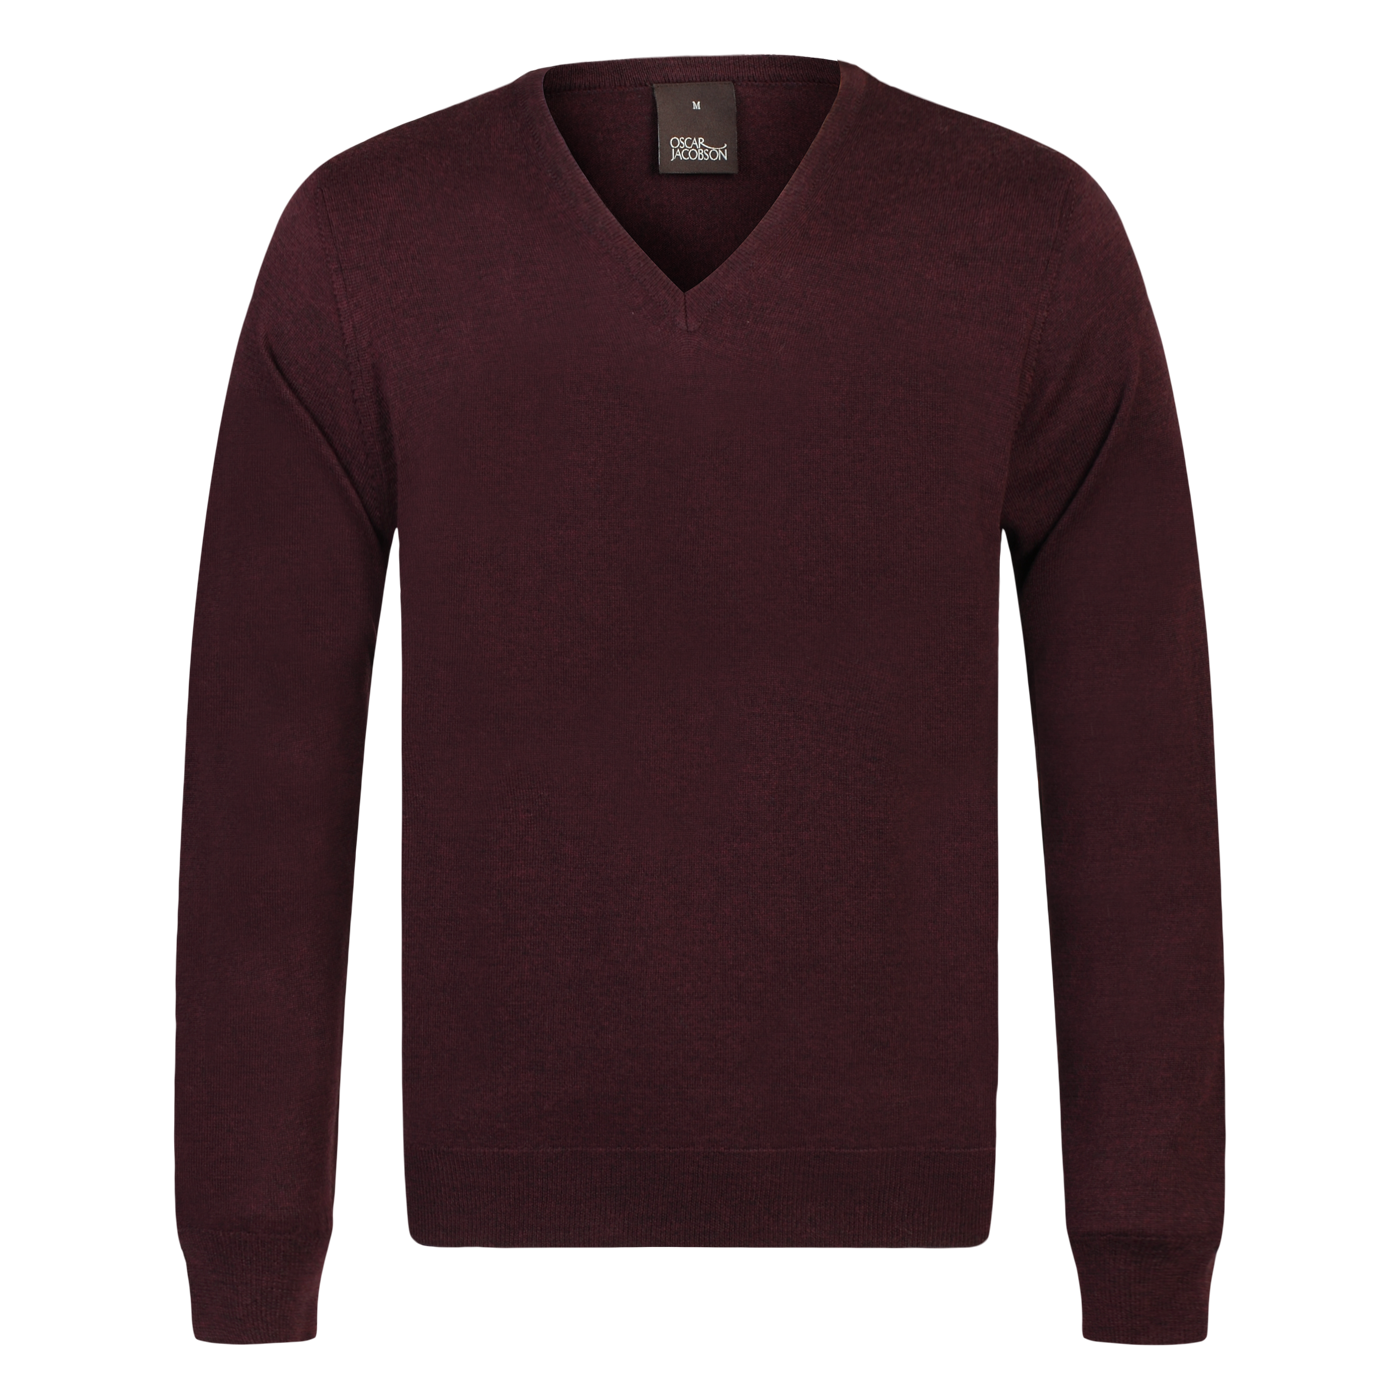 Oscar Jacobson reveal 'cashwool' sweater and slipover